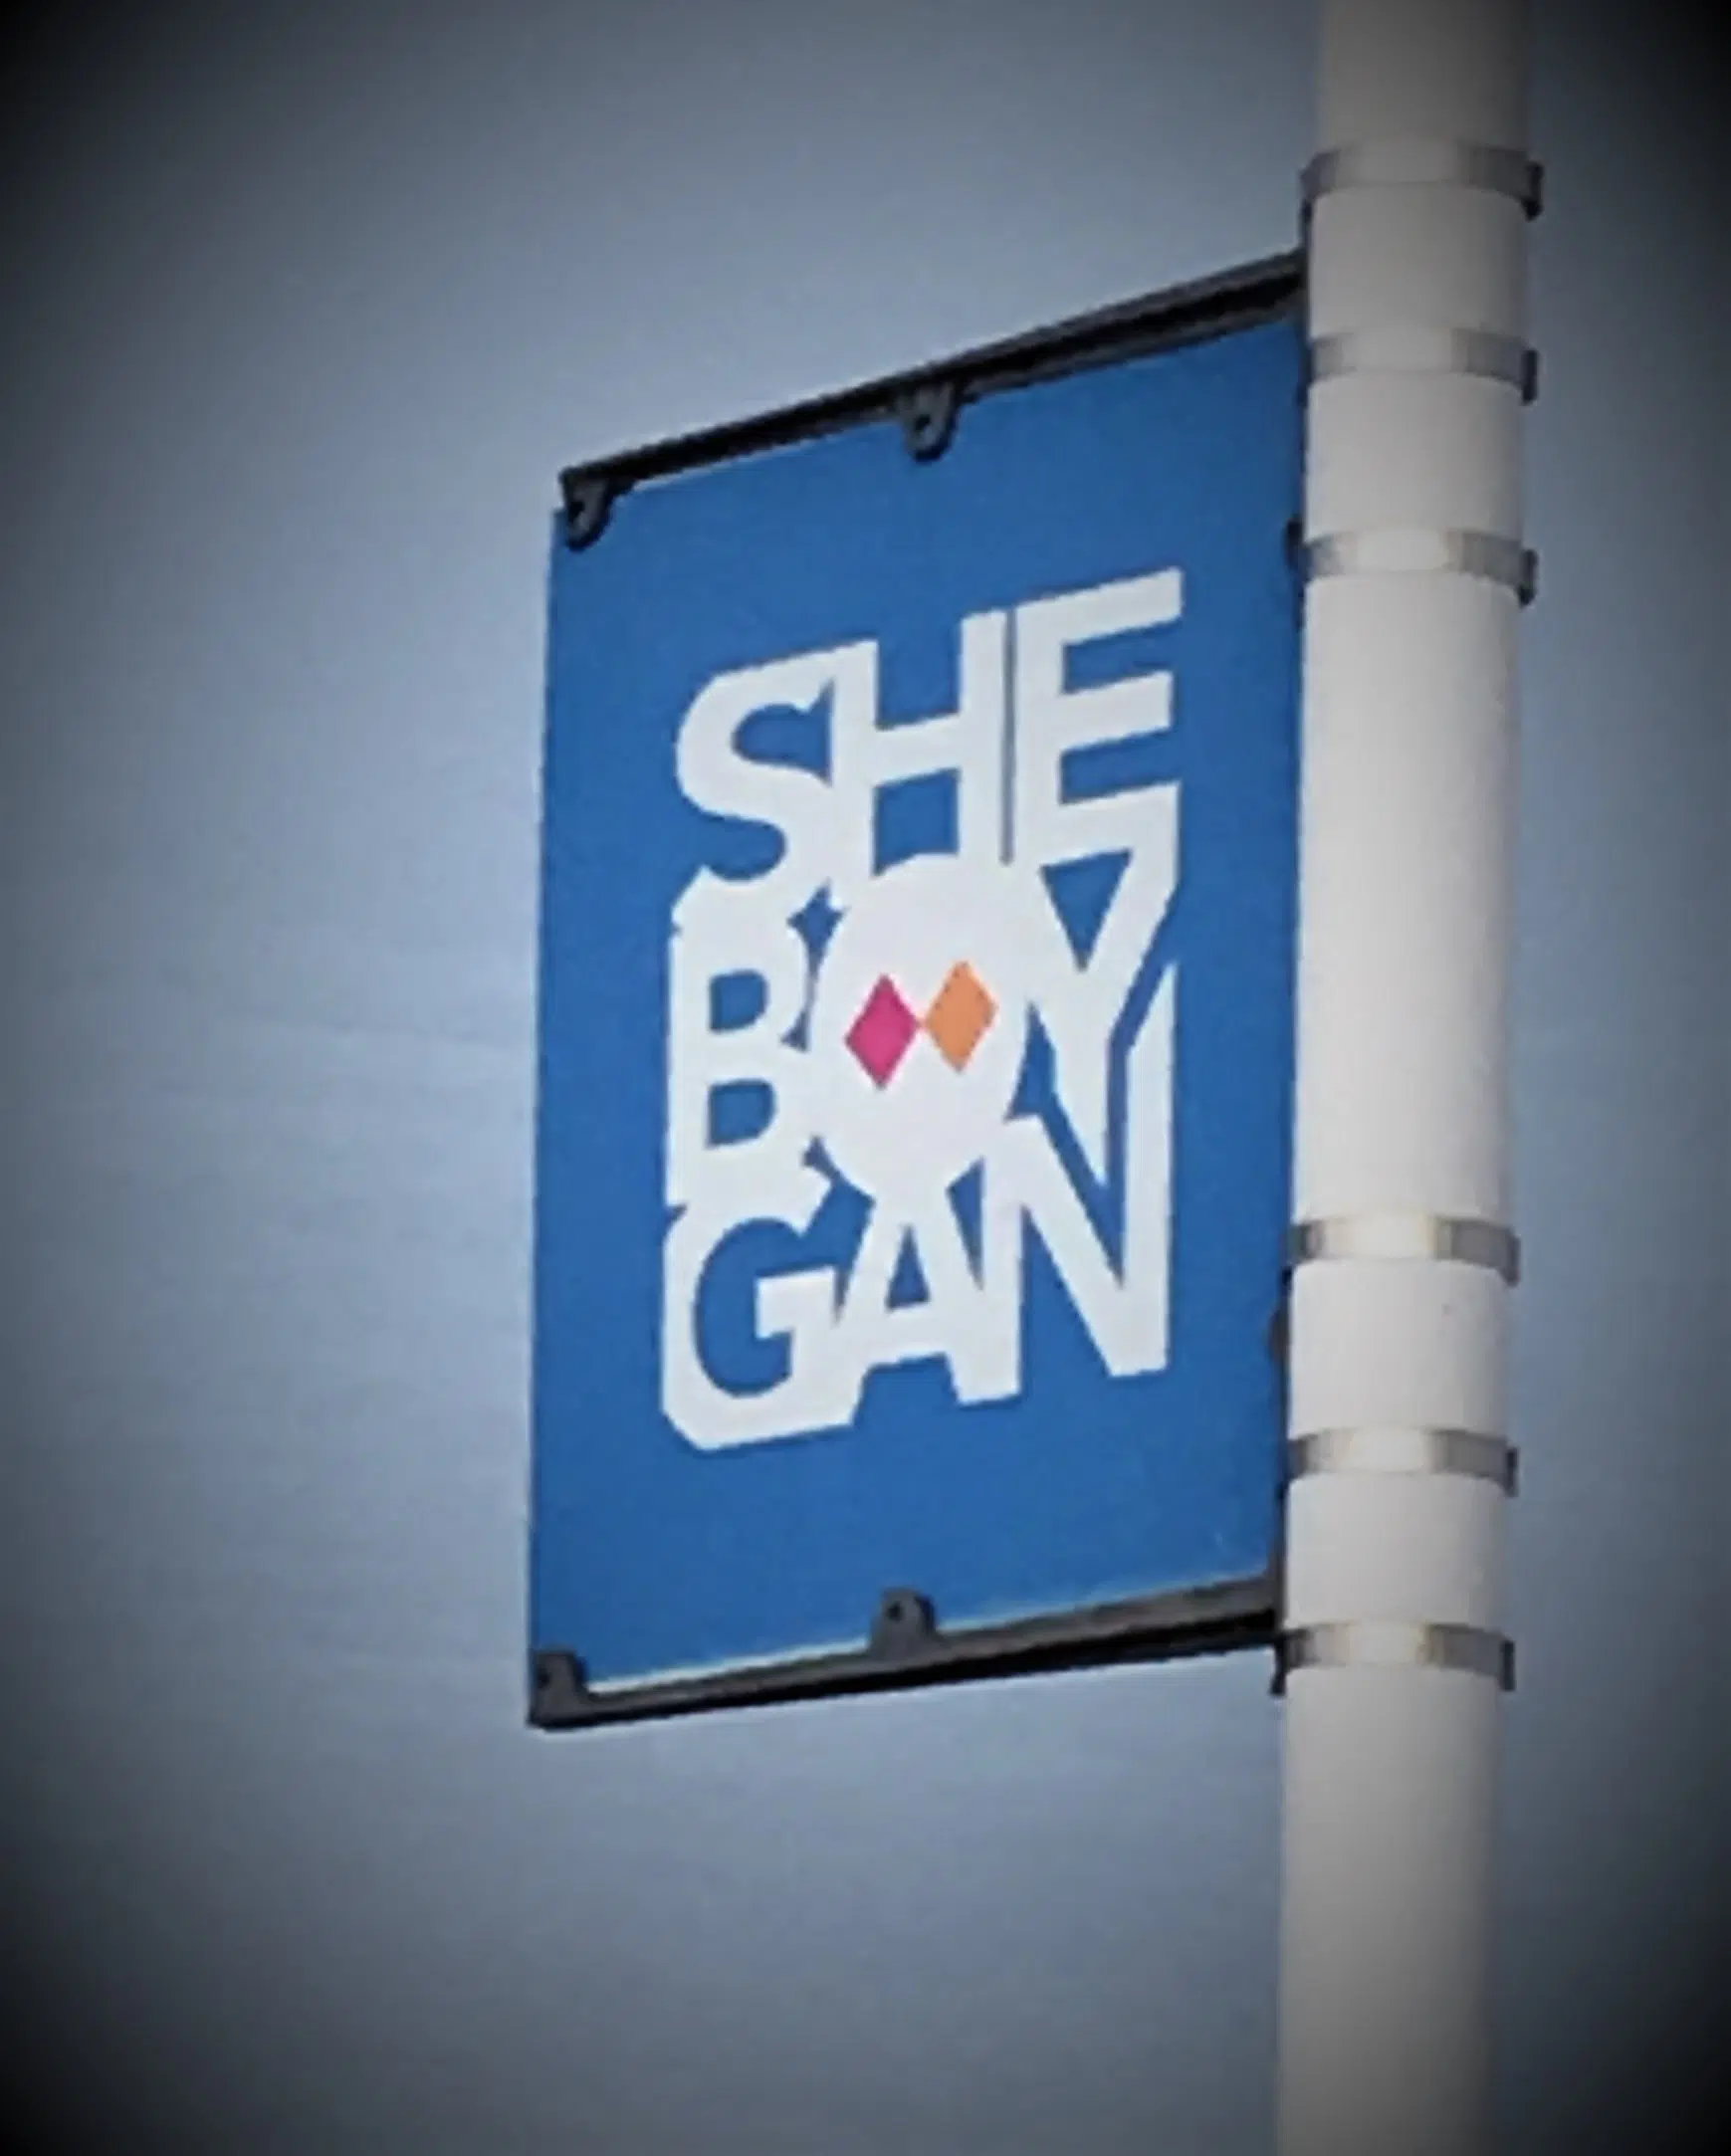 Sheboygan Named Second Most Livable City in U.S. 